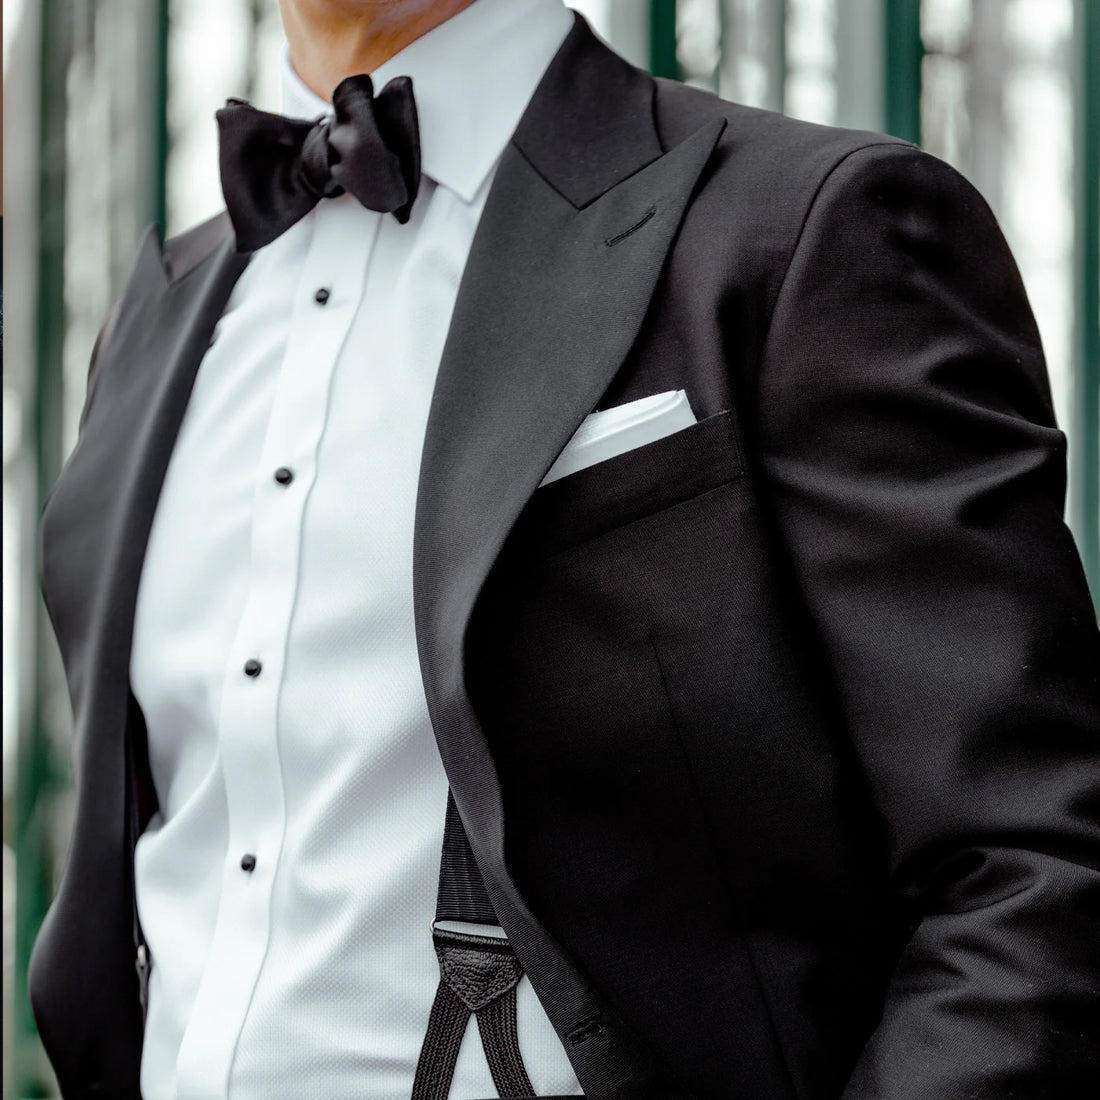 A person wearing a formal black suit with a bow tie and a white pocket square.